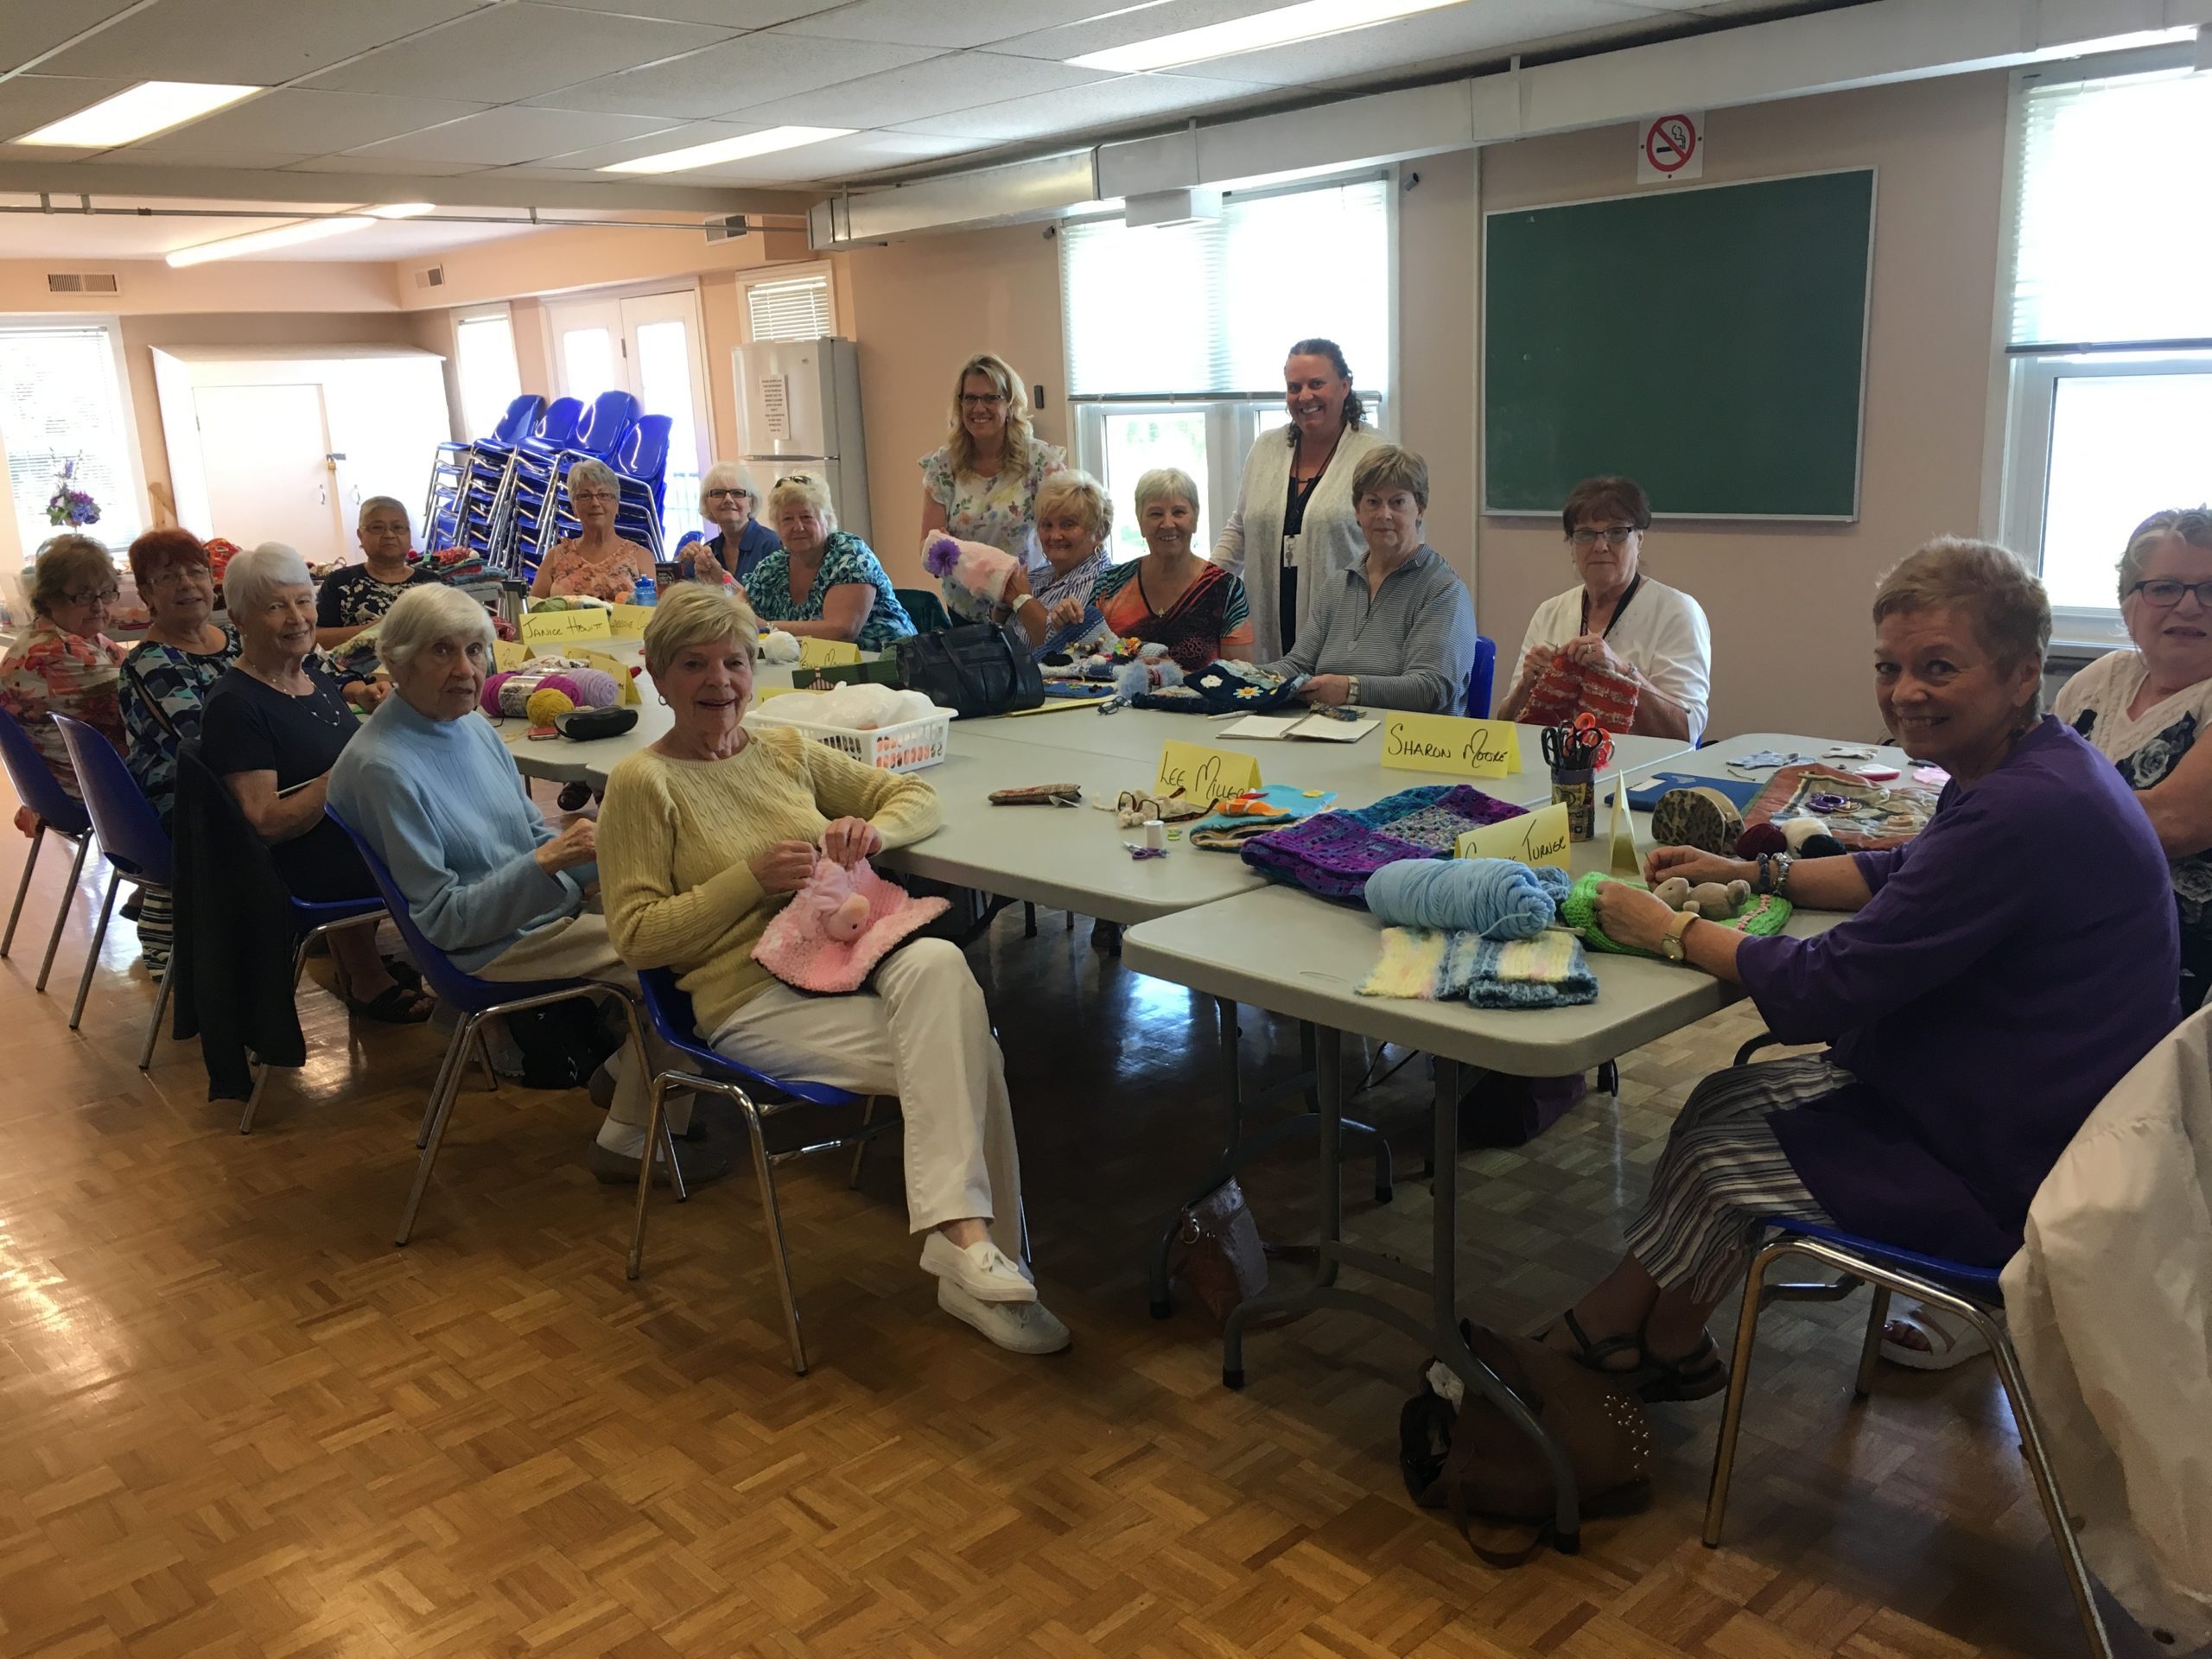 Crafters at their stations creating fidget muffs for Grandview Kids